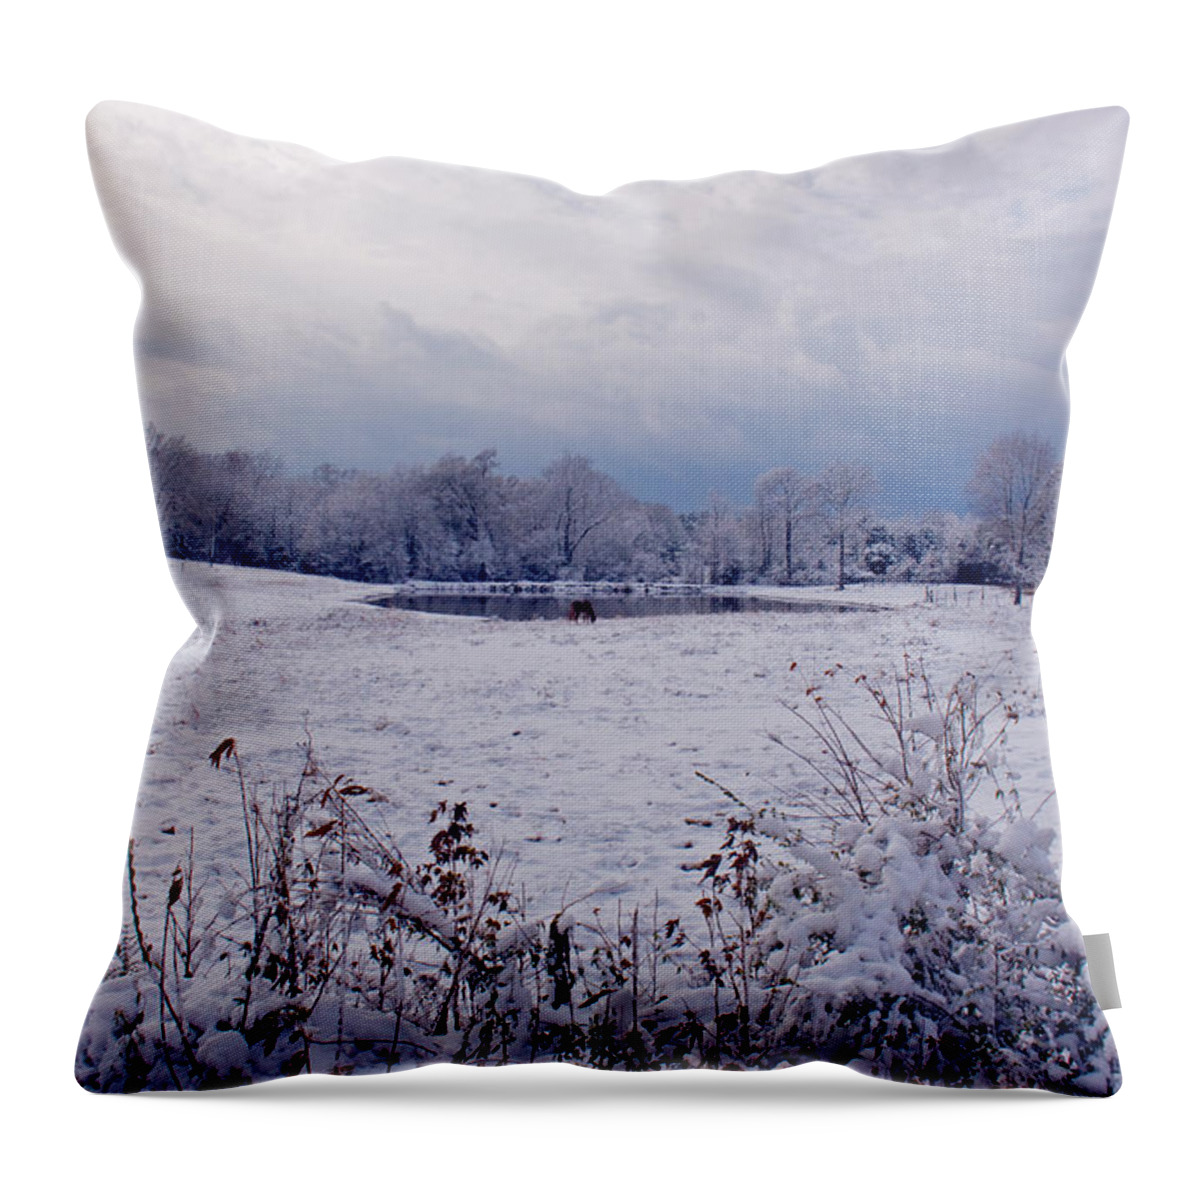 Snow Throw Pillow featuring the photograph December Snow 005 by Andy Lawless